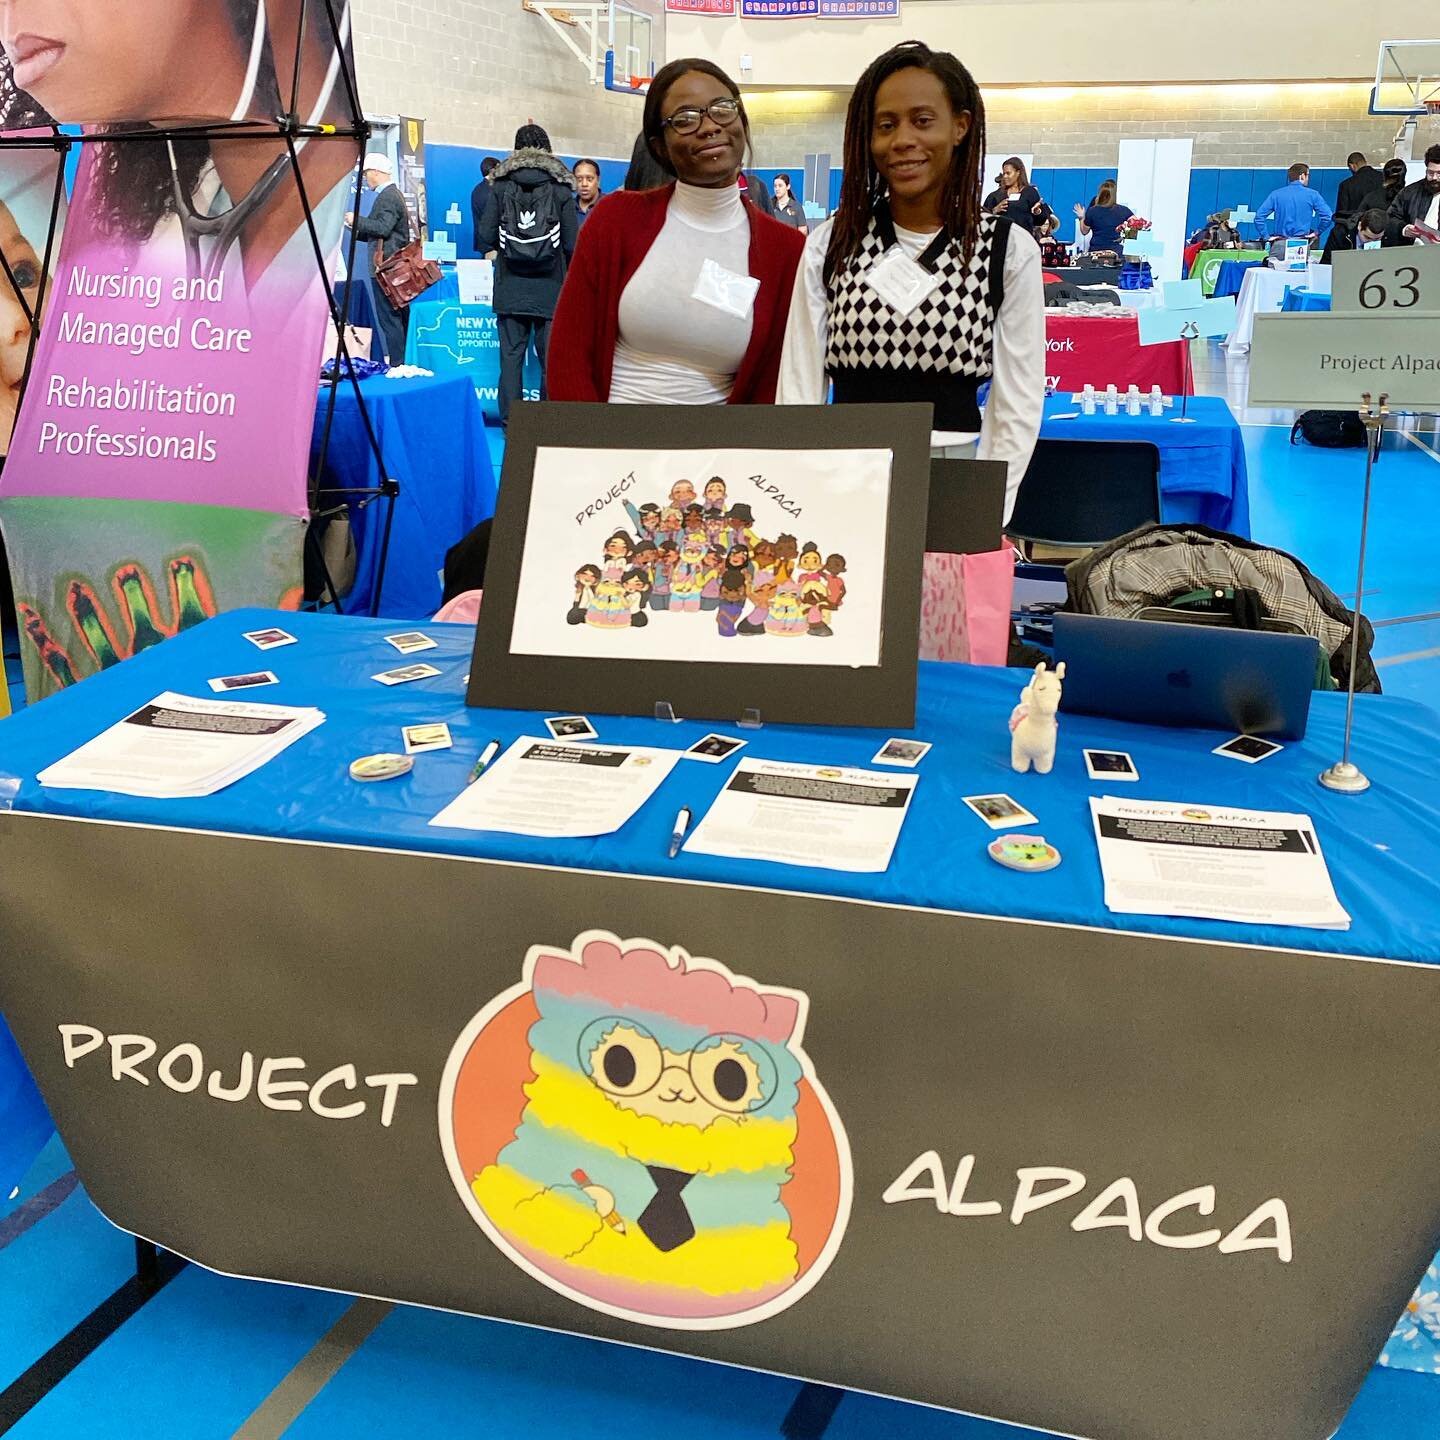 Team Project Alpaca @supatrixia @koi_fish568 and @cathrnman are at @lehmancuny today for the career fair! Please stop by to say hi! Special thanks to Navisha from @lehmancareers for the help!

#cuny #careerfair #lehman #lehmancollege #lehmancareers #